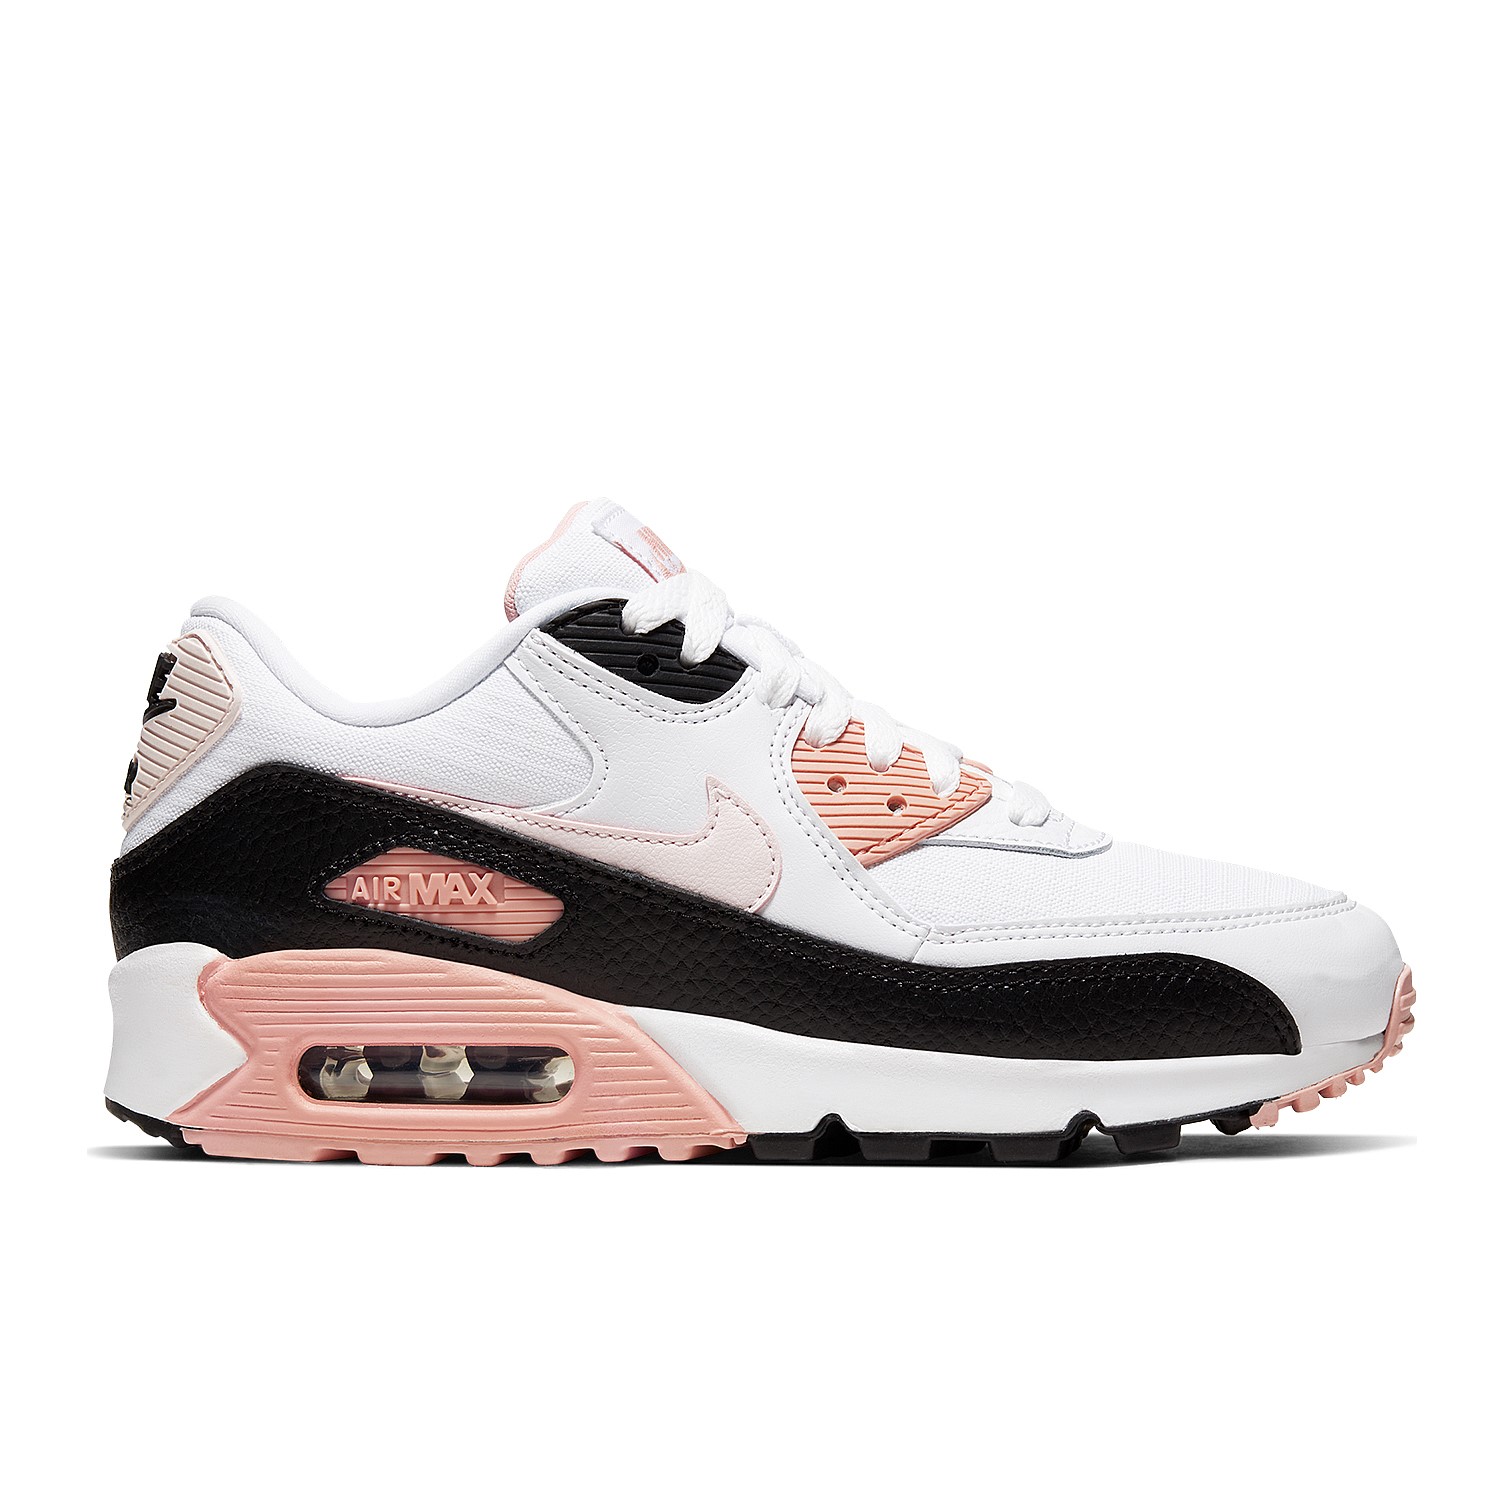 Stirling Sports - Air Max 90 Womens